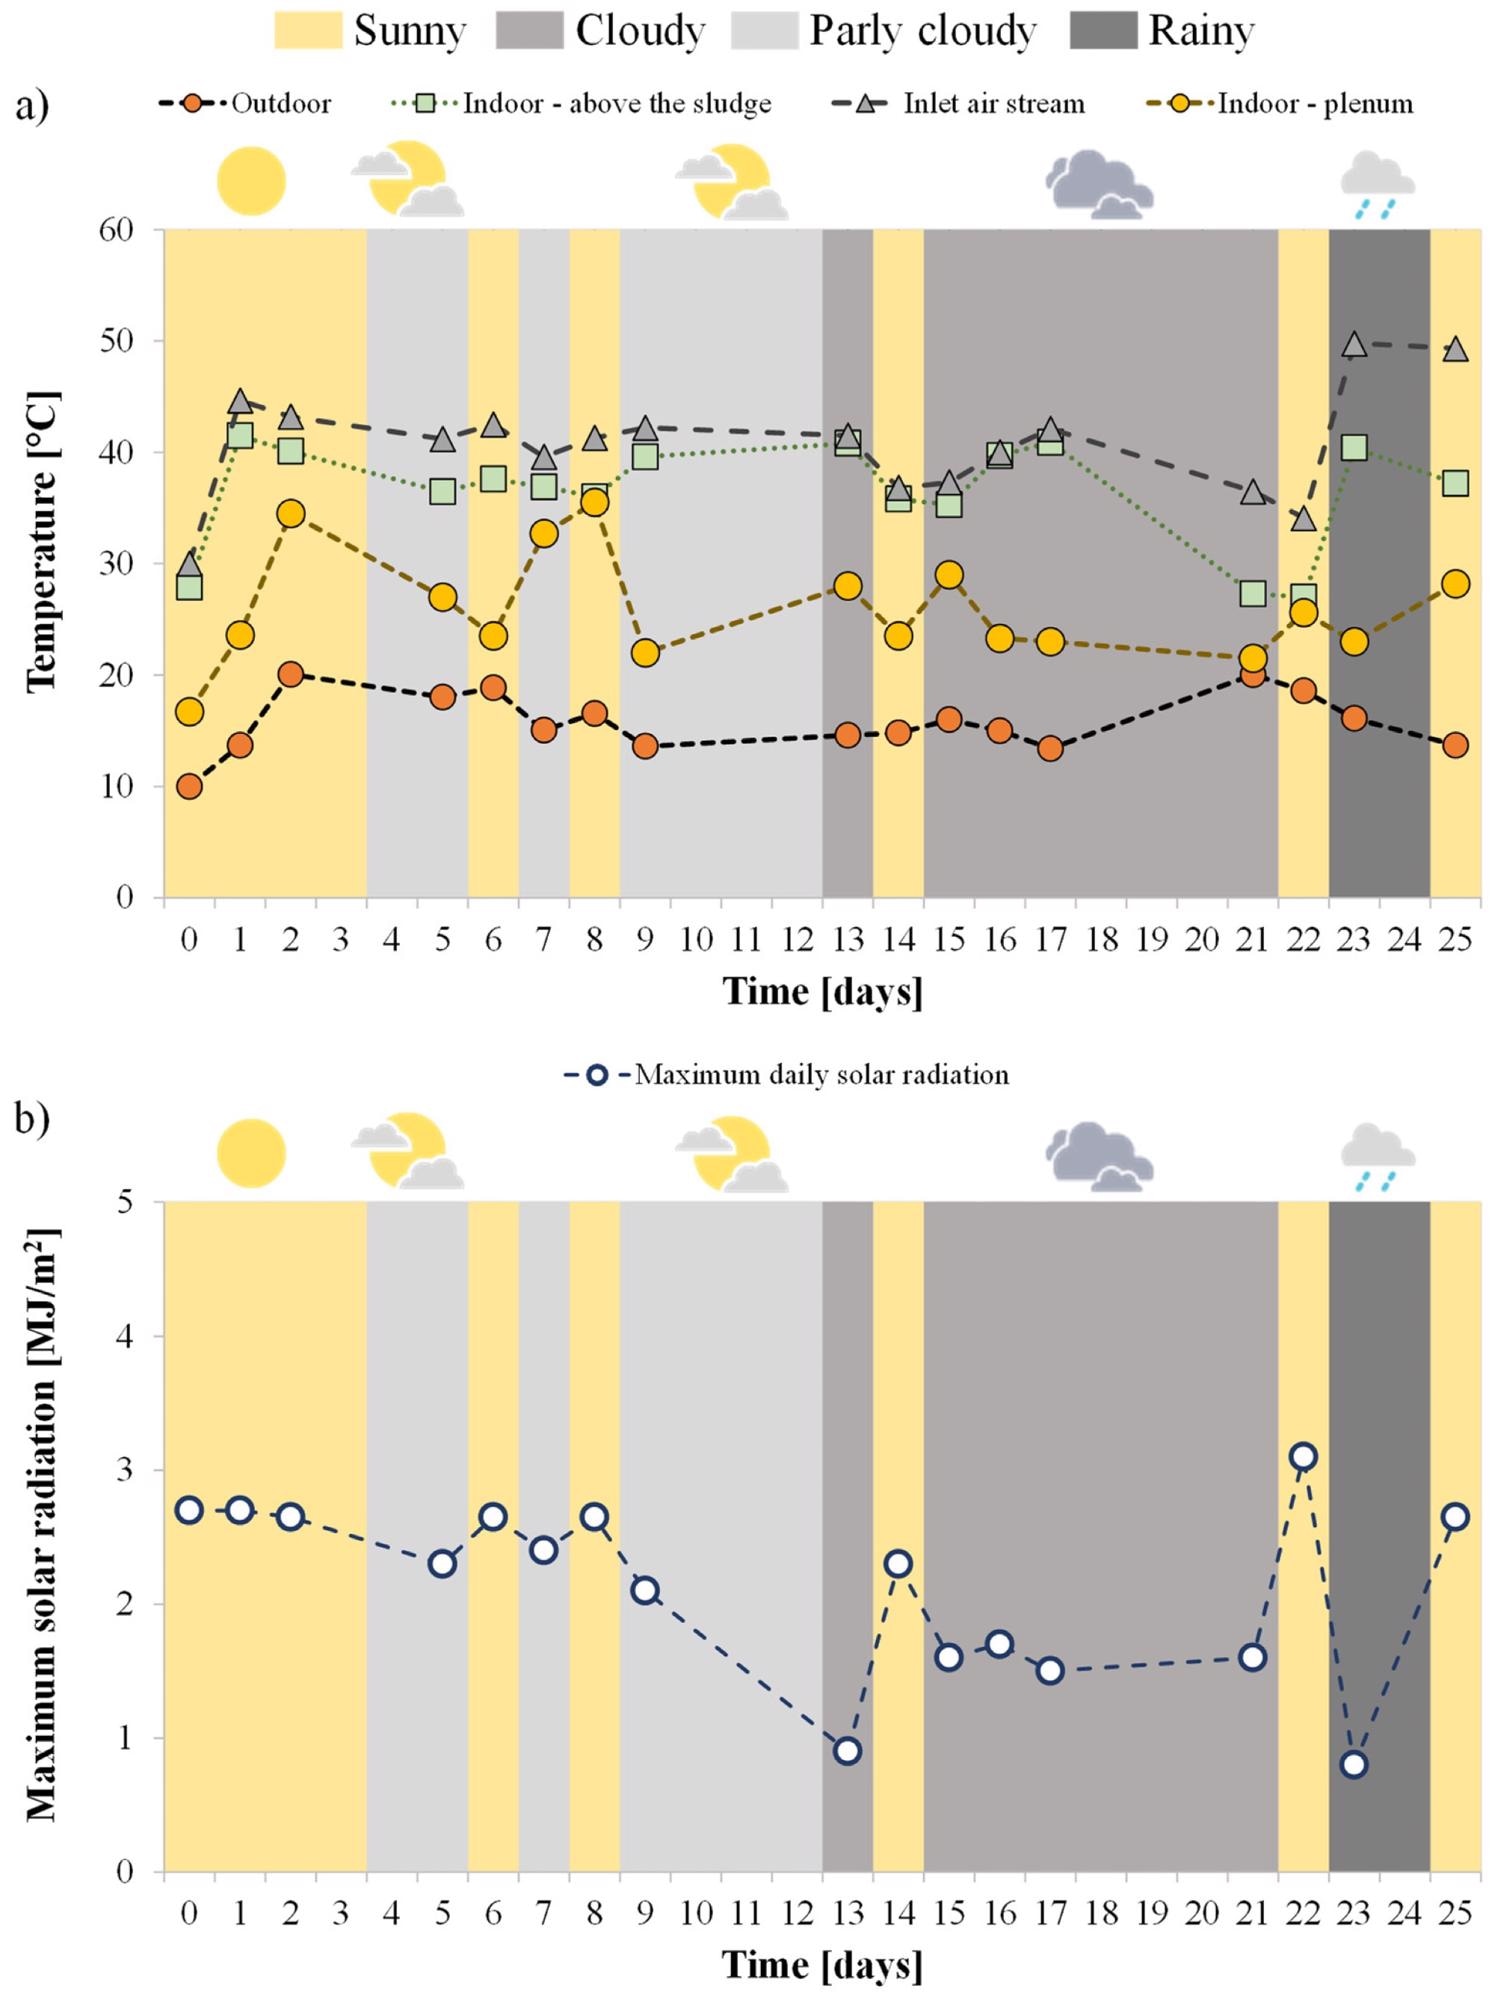 Wheatear conditions, trends of the average temperature measured in different points (a) and trend of the maximum daily solar irradiation (b).